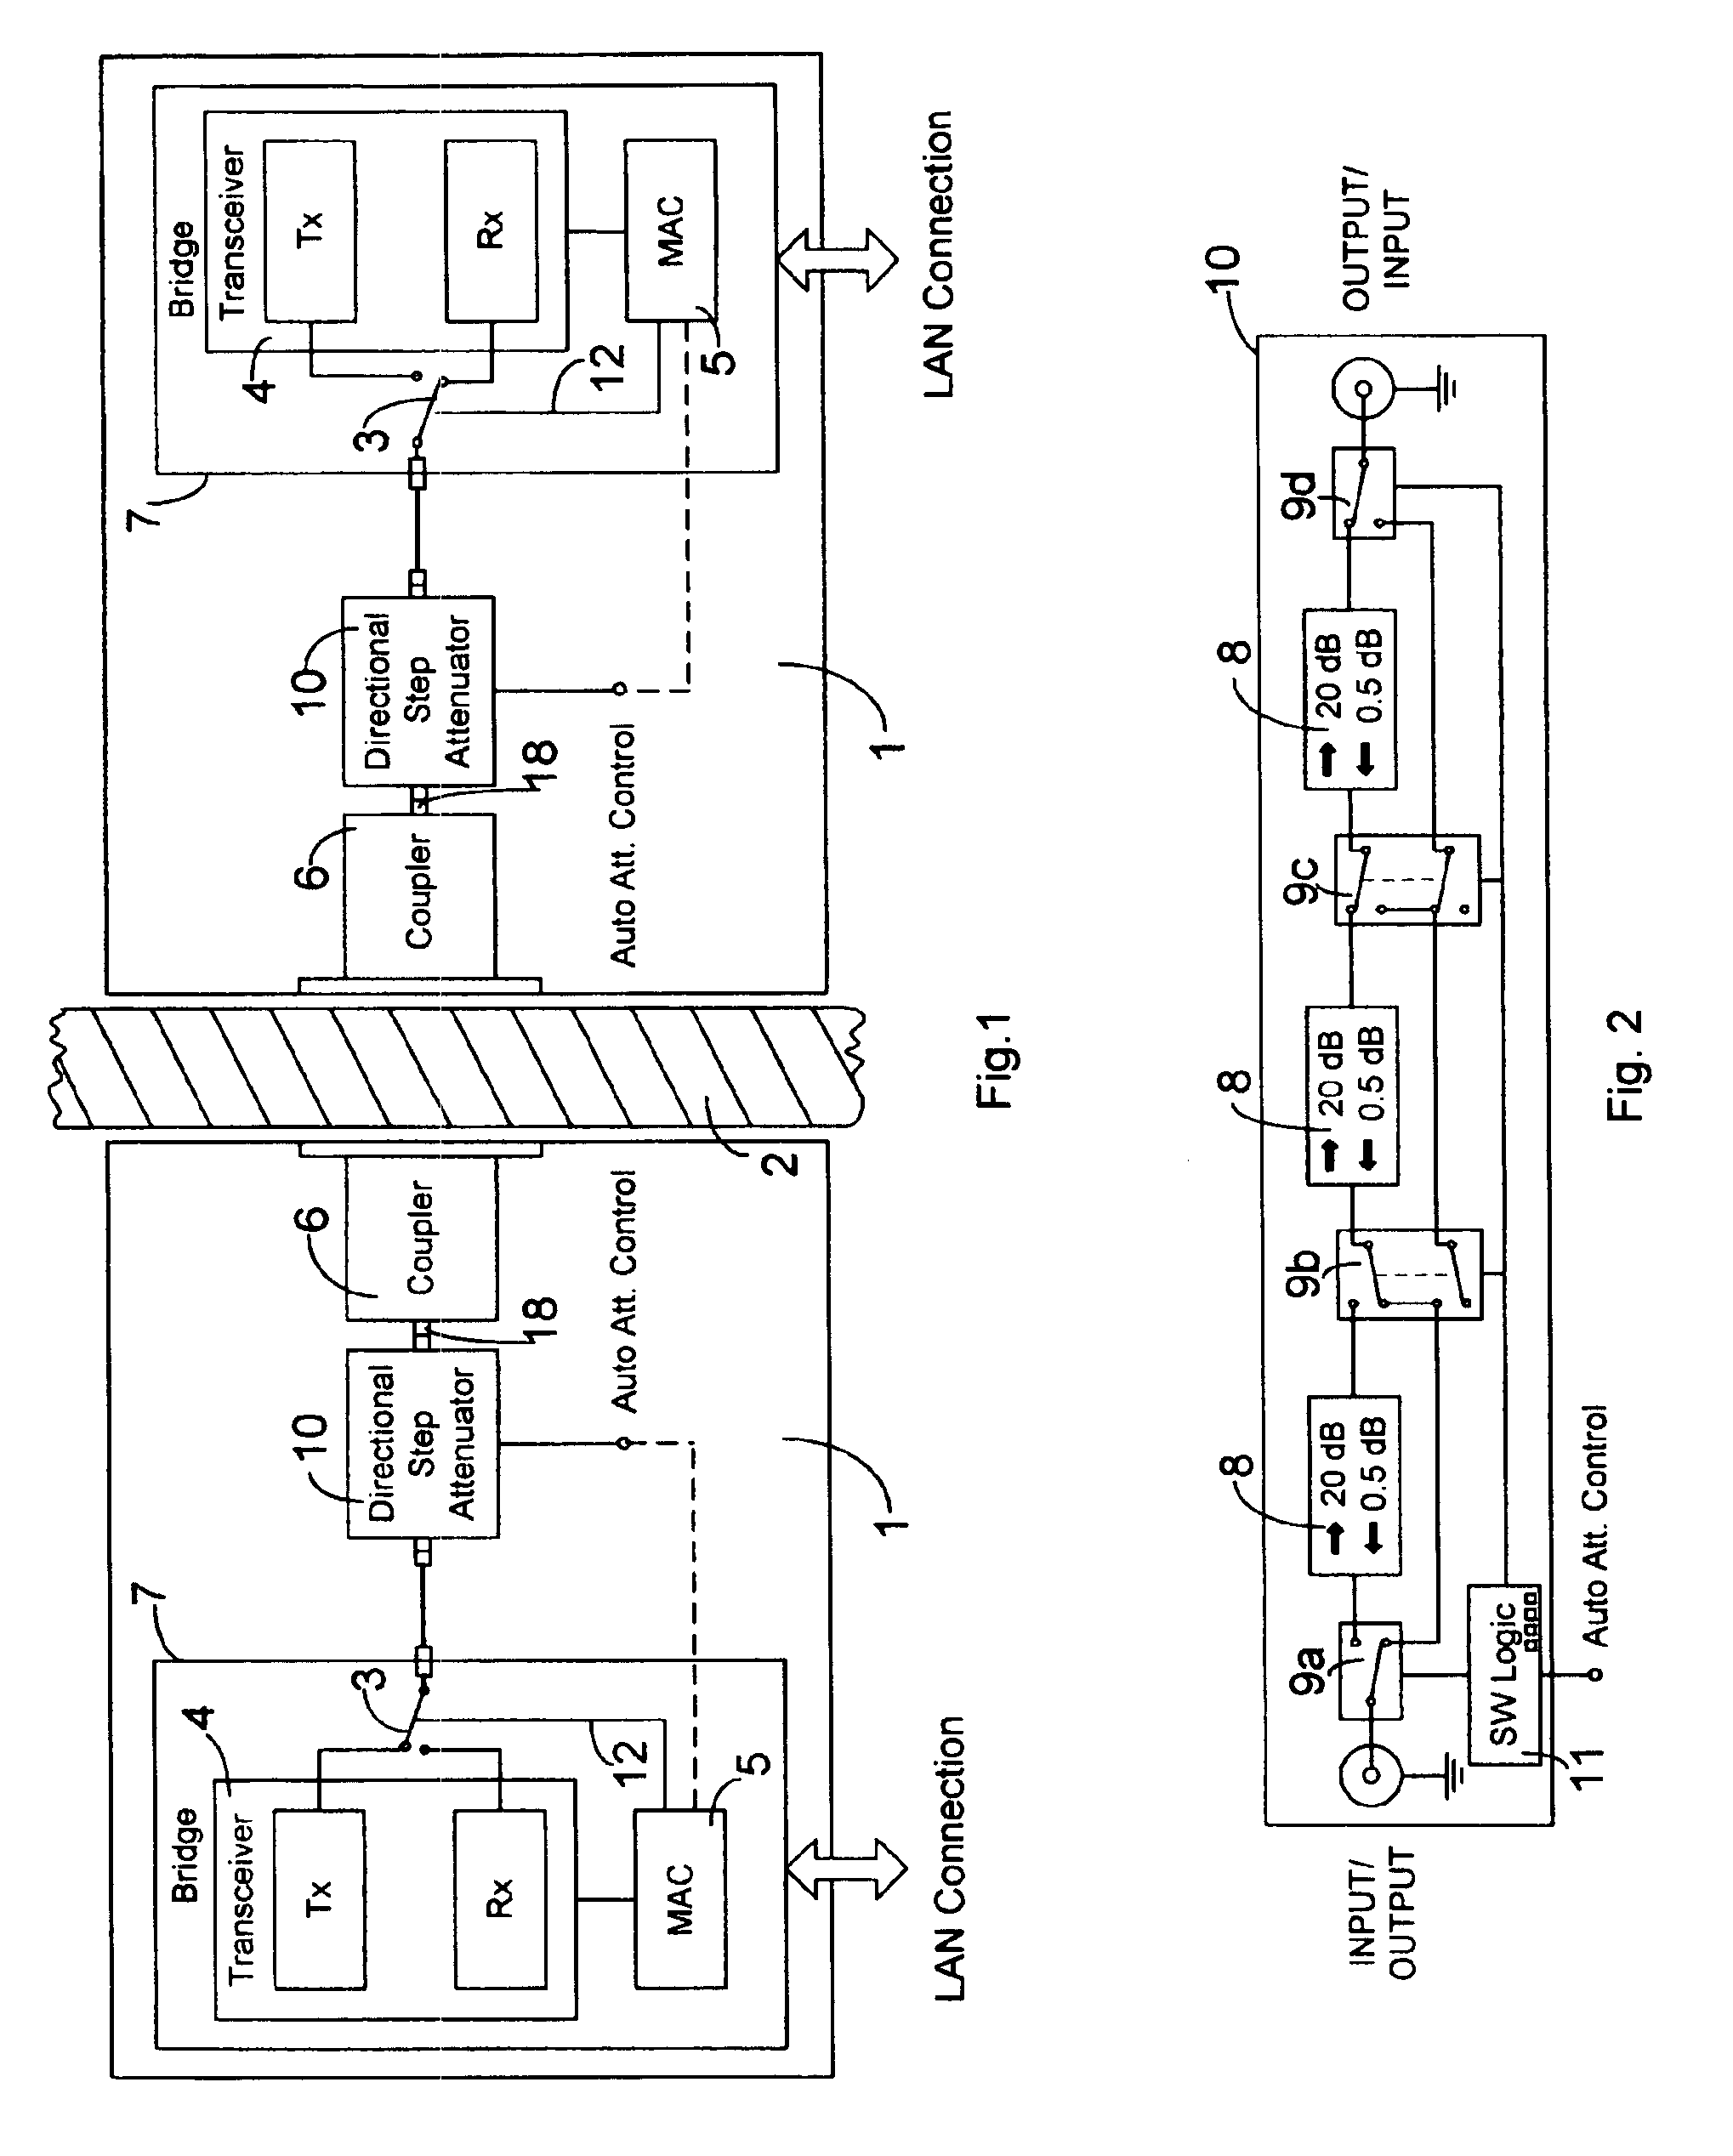 Electromagnetic coupler system